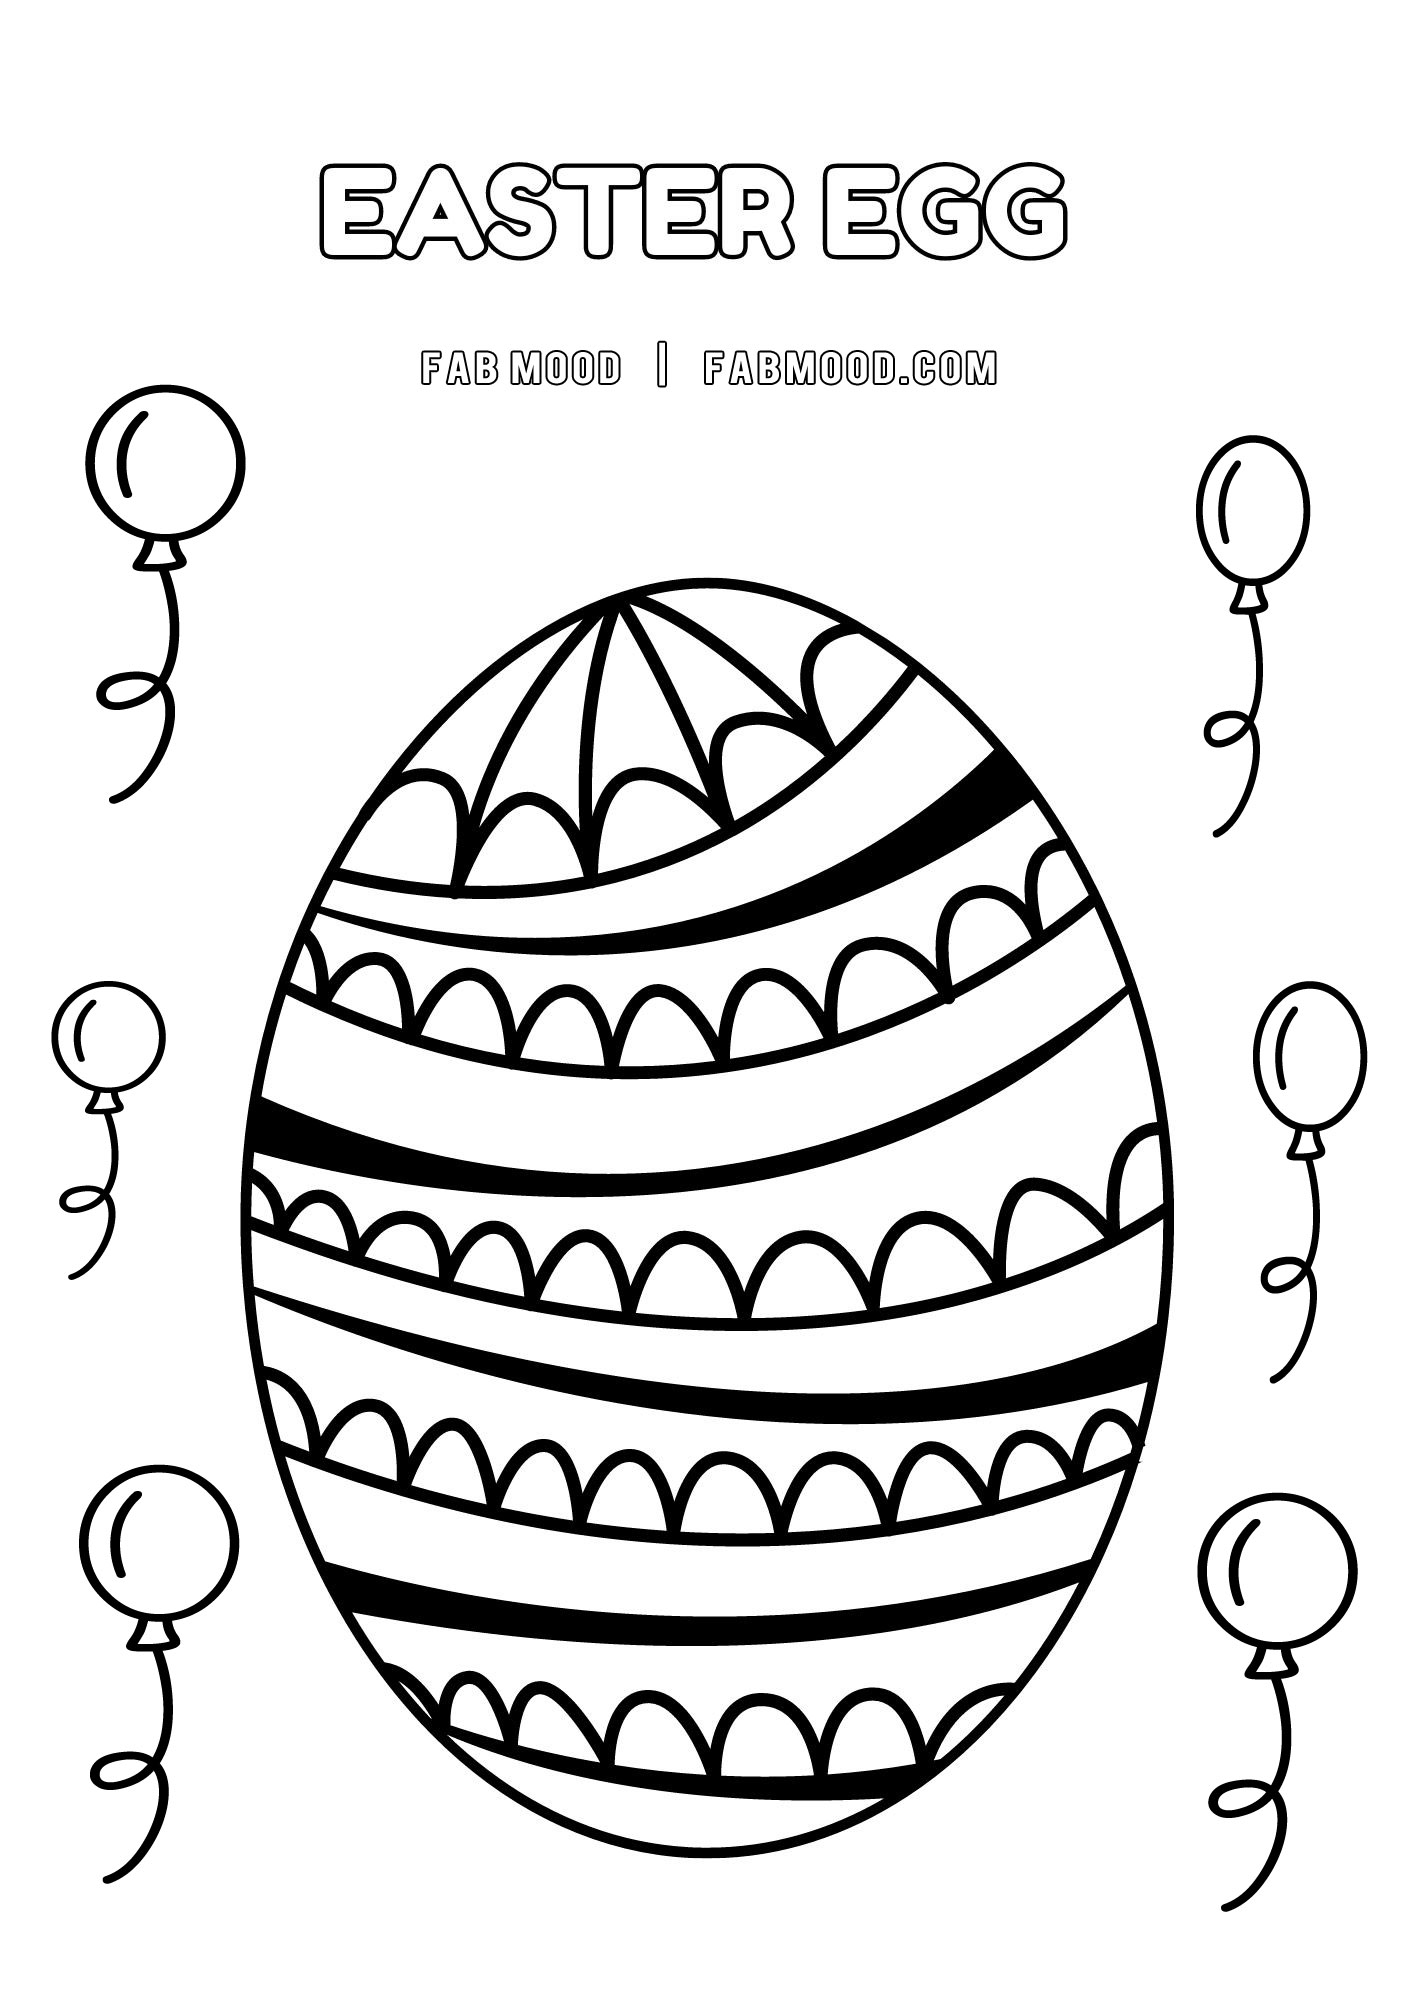 FREE 10 Easter Colouring Pictures : Easter Egg & Balloons